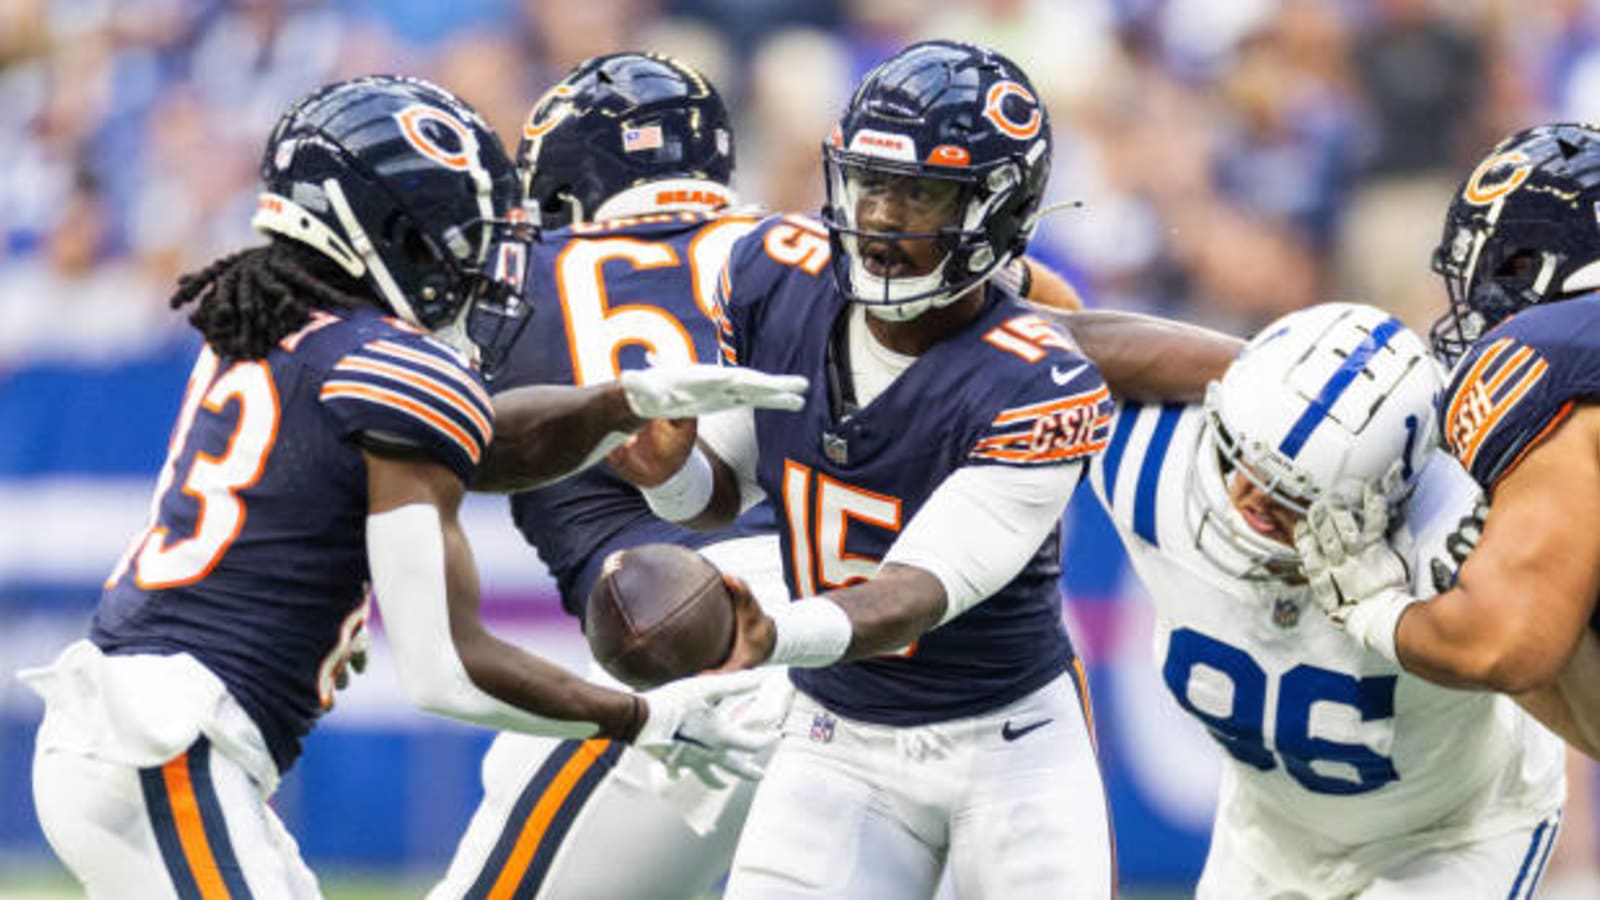 Where the Bears Could Seek Out Players After Cuts